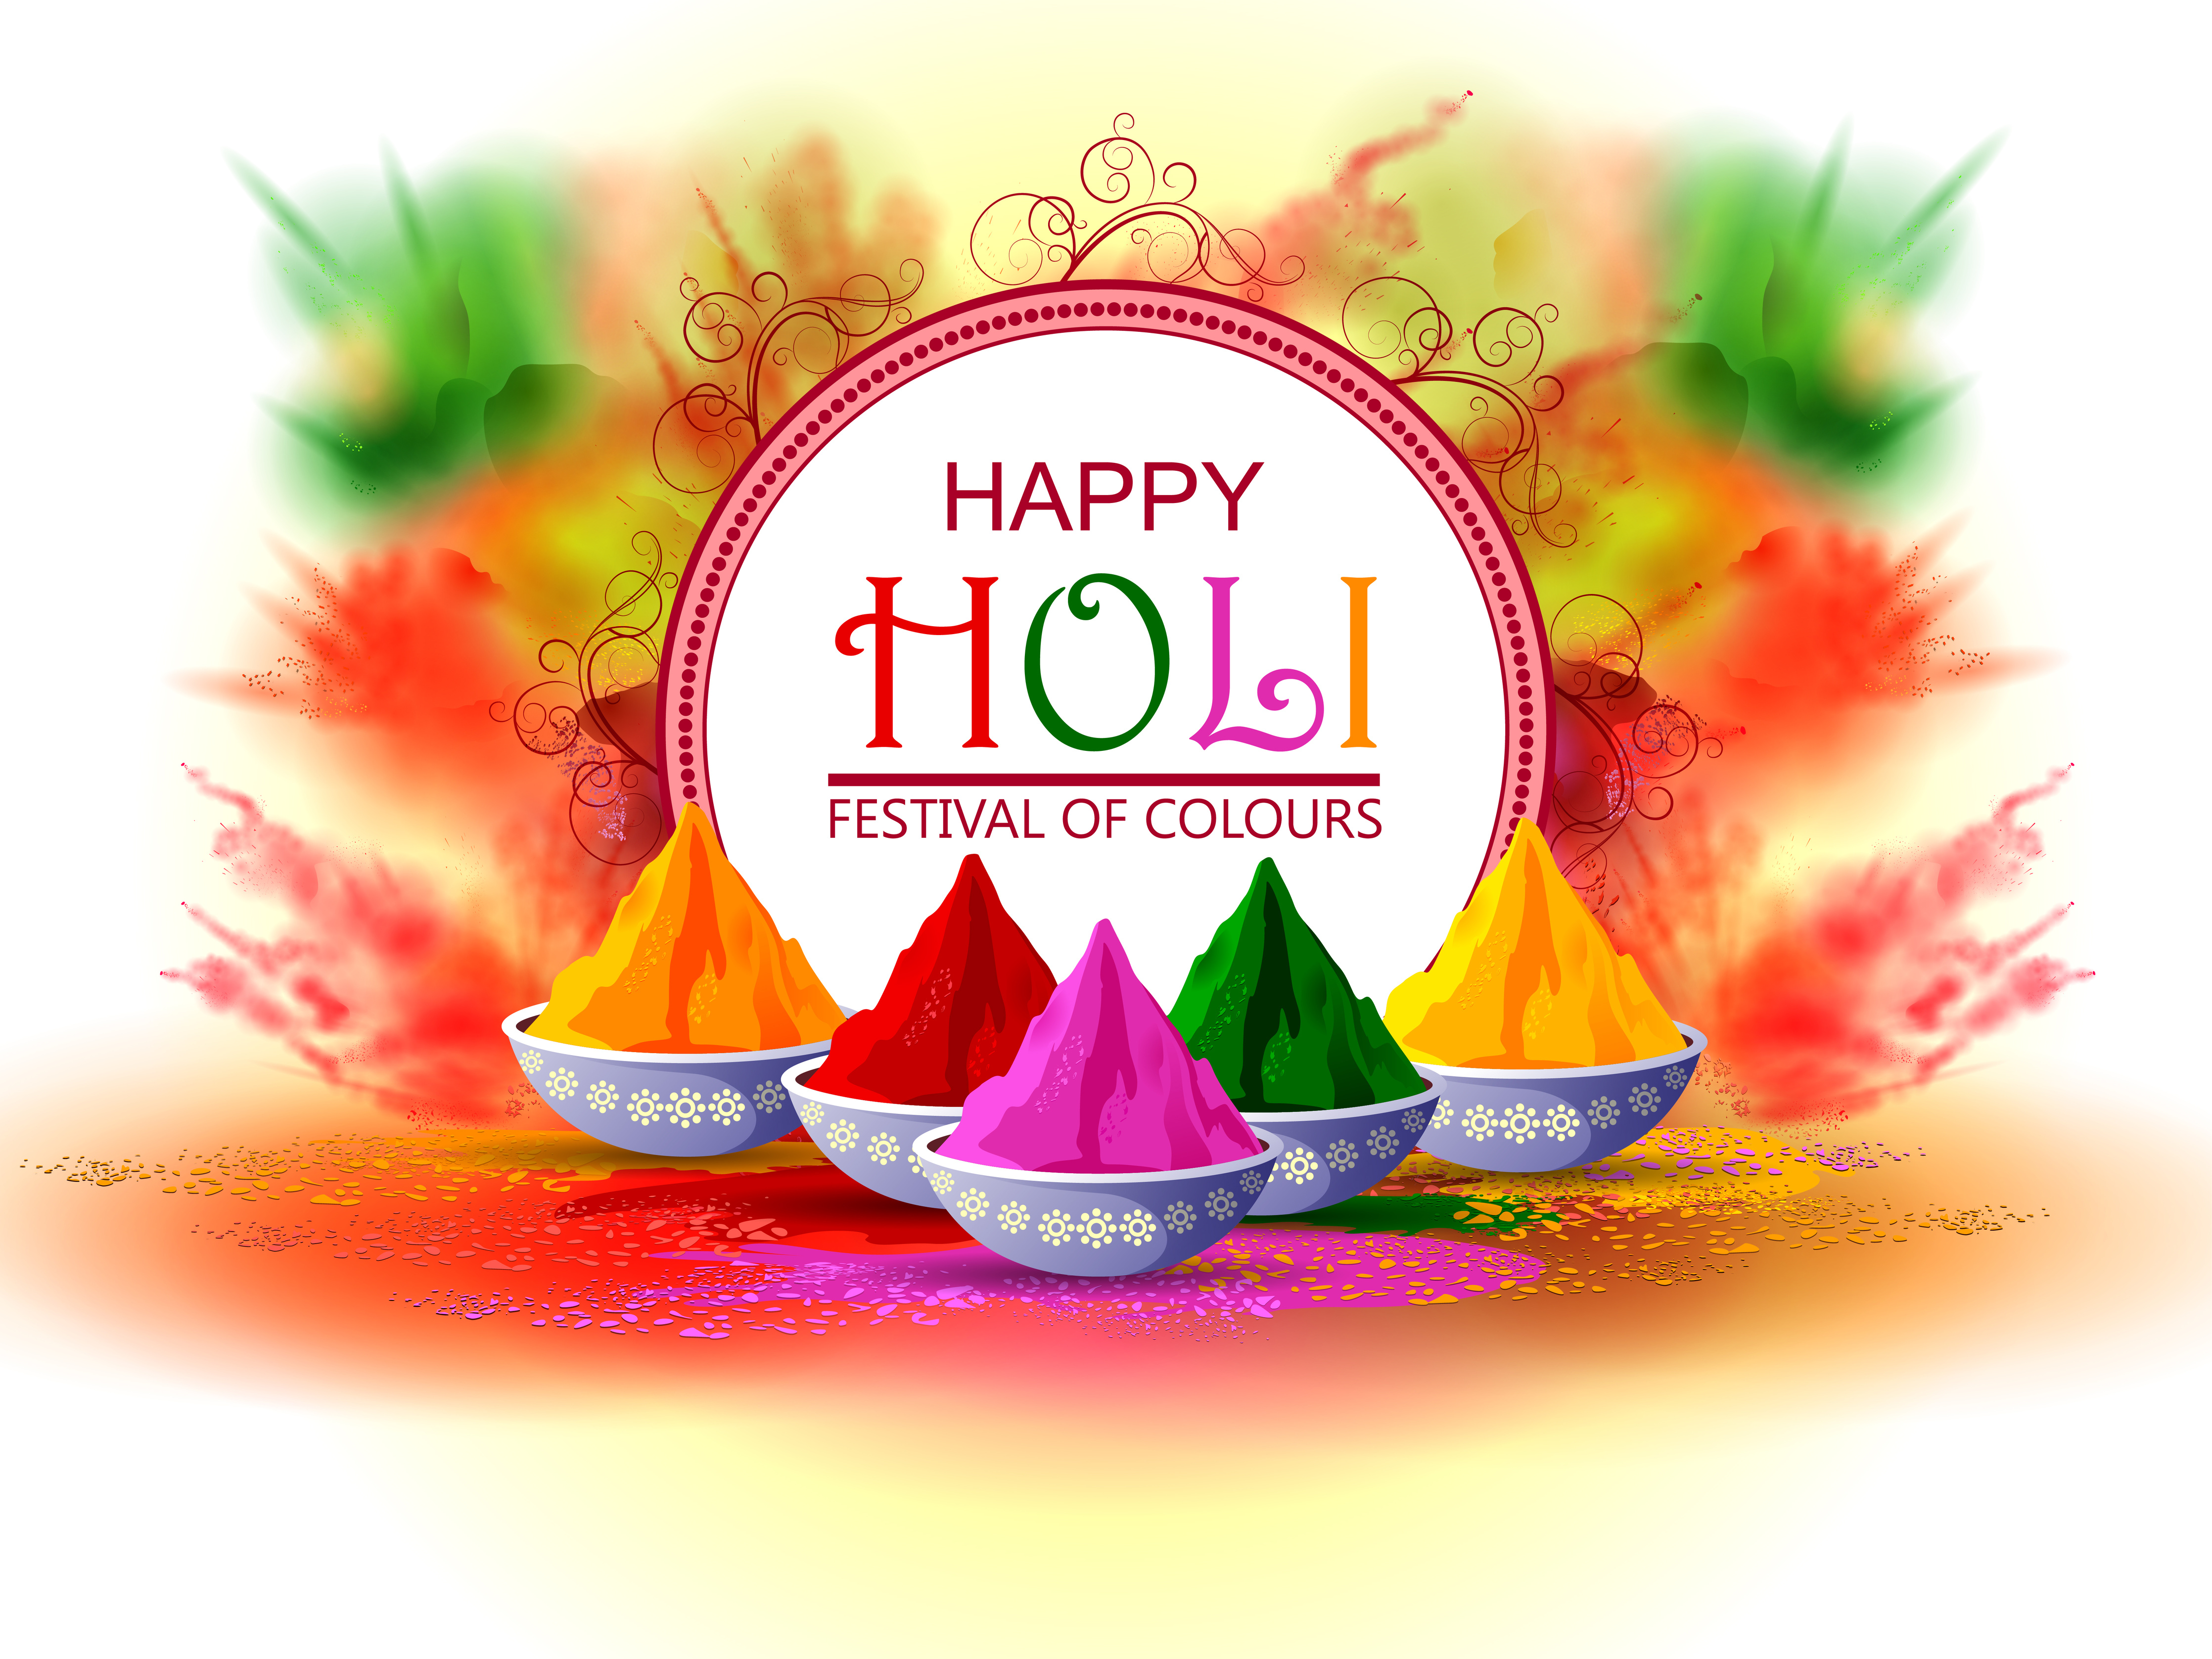 A decorative image saying "Happy Holi. Festival of Colors."